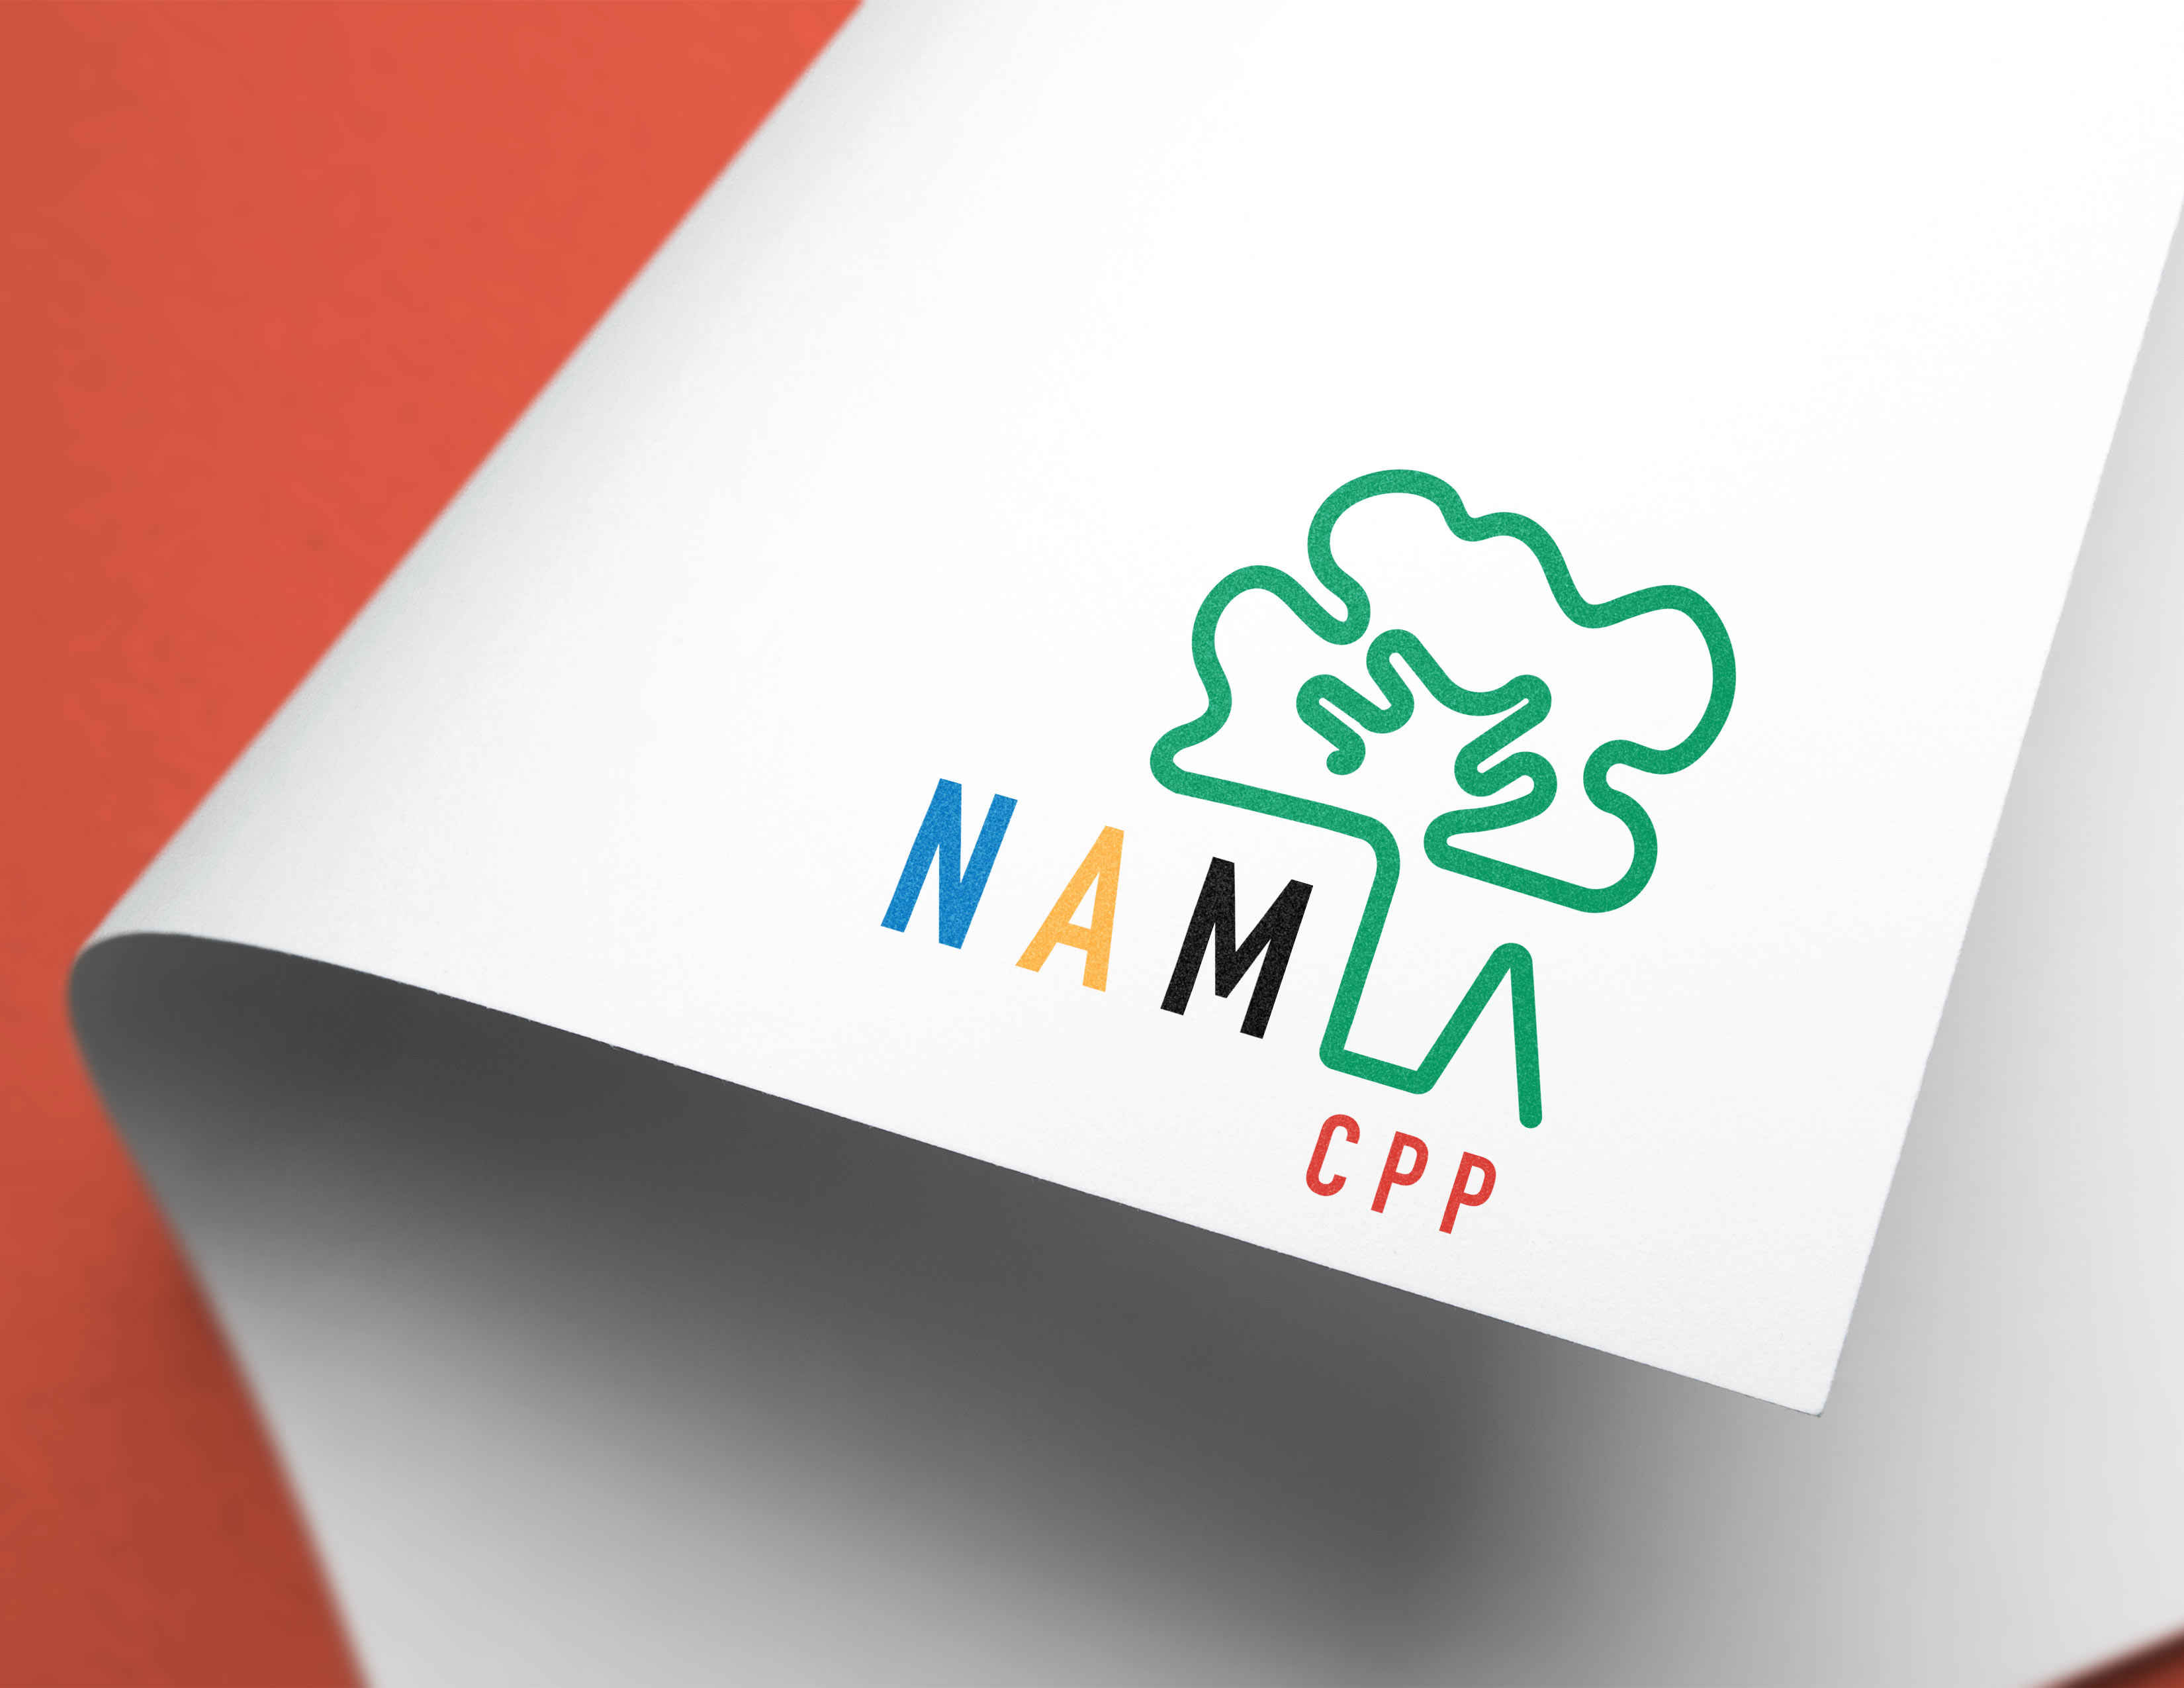 Colorful logo with a tree that says NAMLA CPP